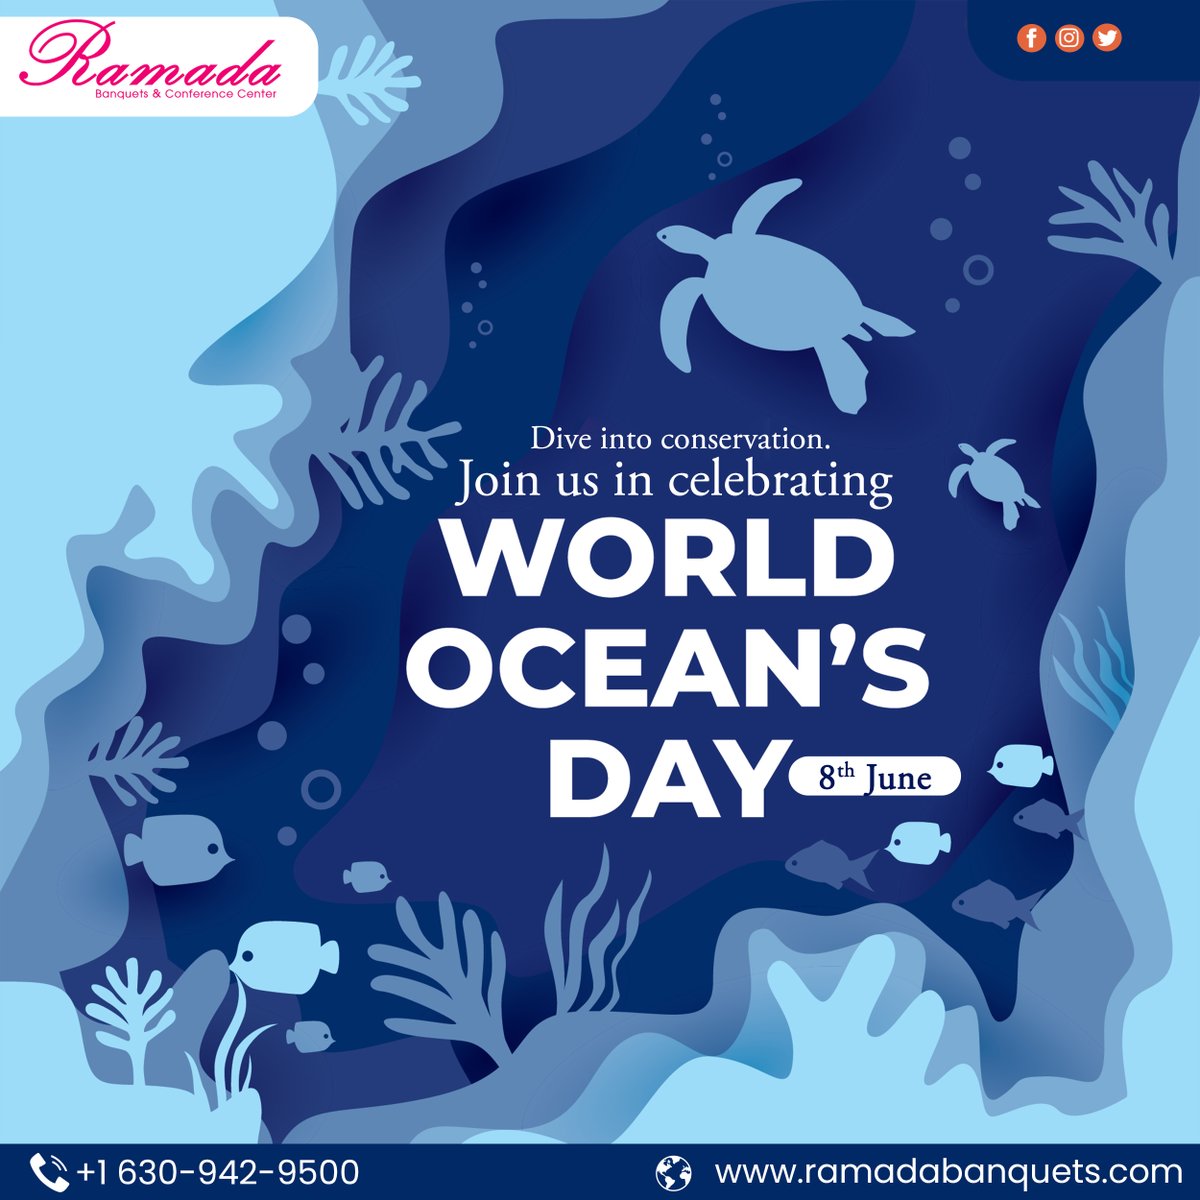 Dive into conservation. Join us in celebrating World Oceans Day.
Let's make waves for a healthier planet! Celebrate World Oceans Day with us at Ramada Banquets. 🌊
#WorldOceansDay #RamadaBanquets #SaveOurSeas #RamadaBanquetHall #BirthdayCelebration #SocialEvents #ConferenceRoom